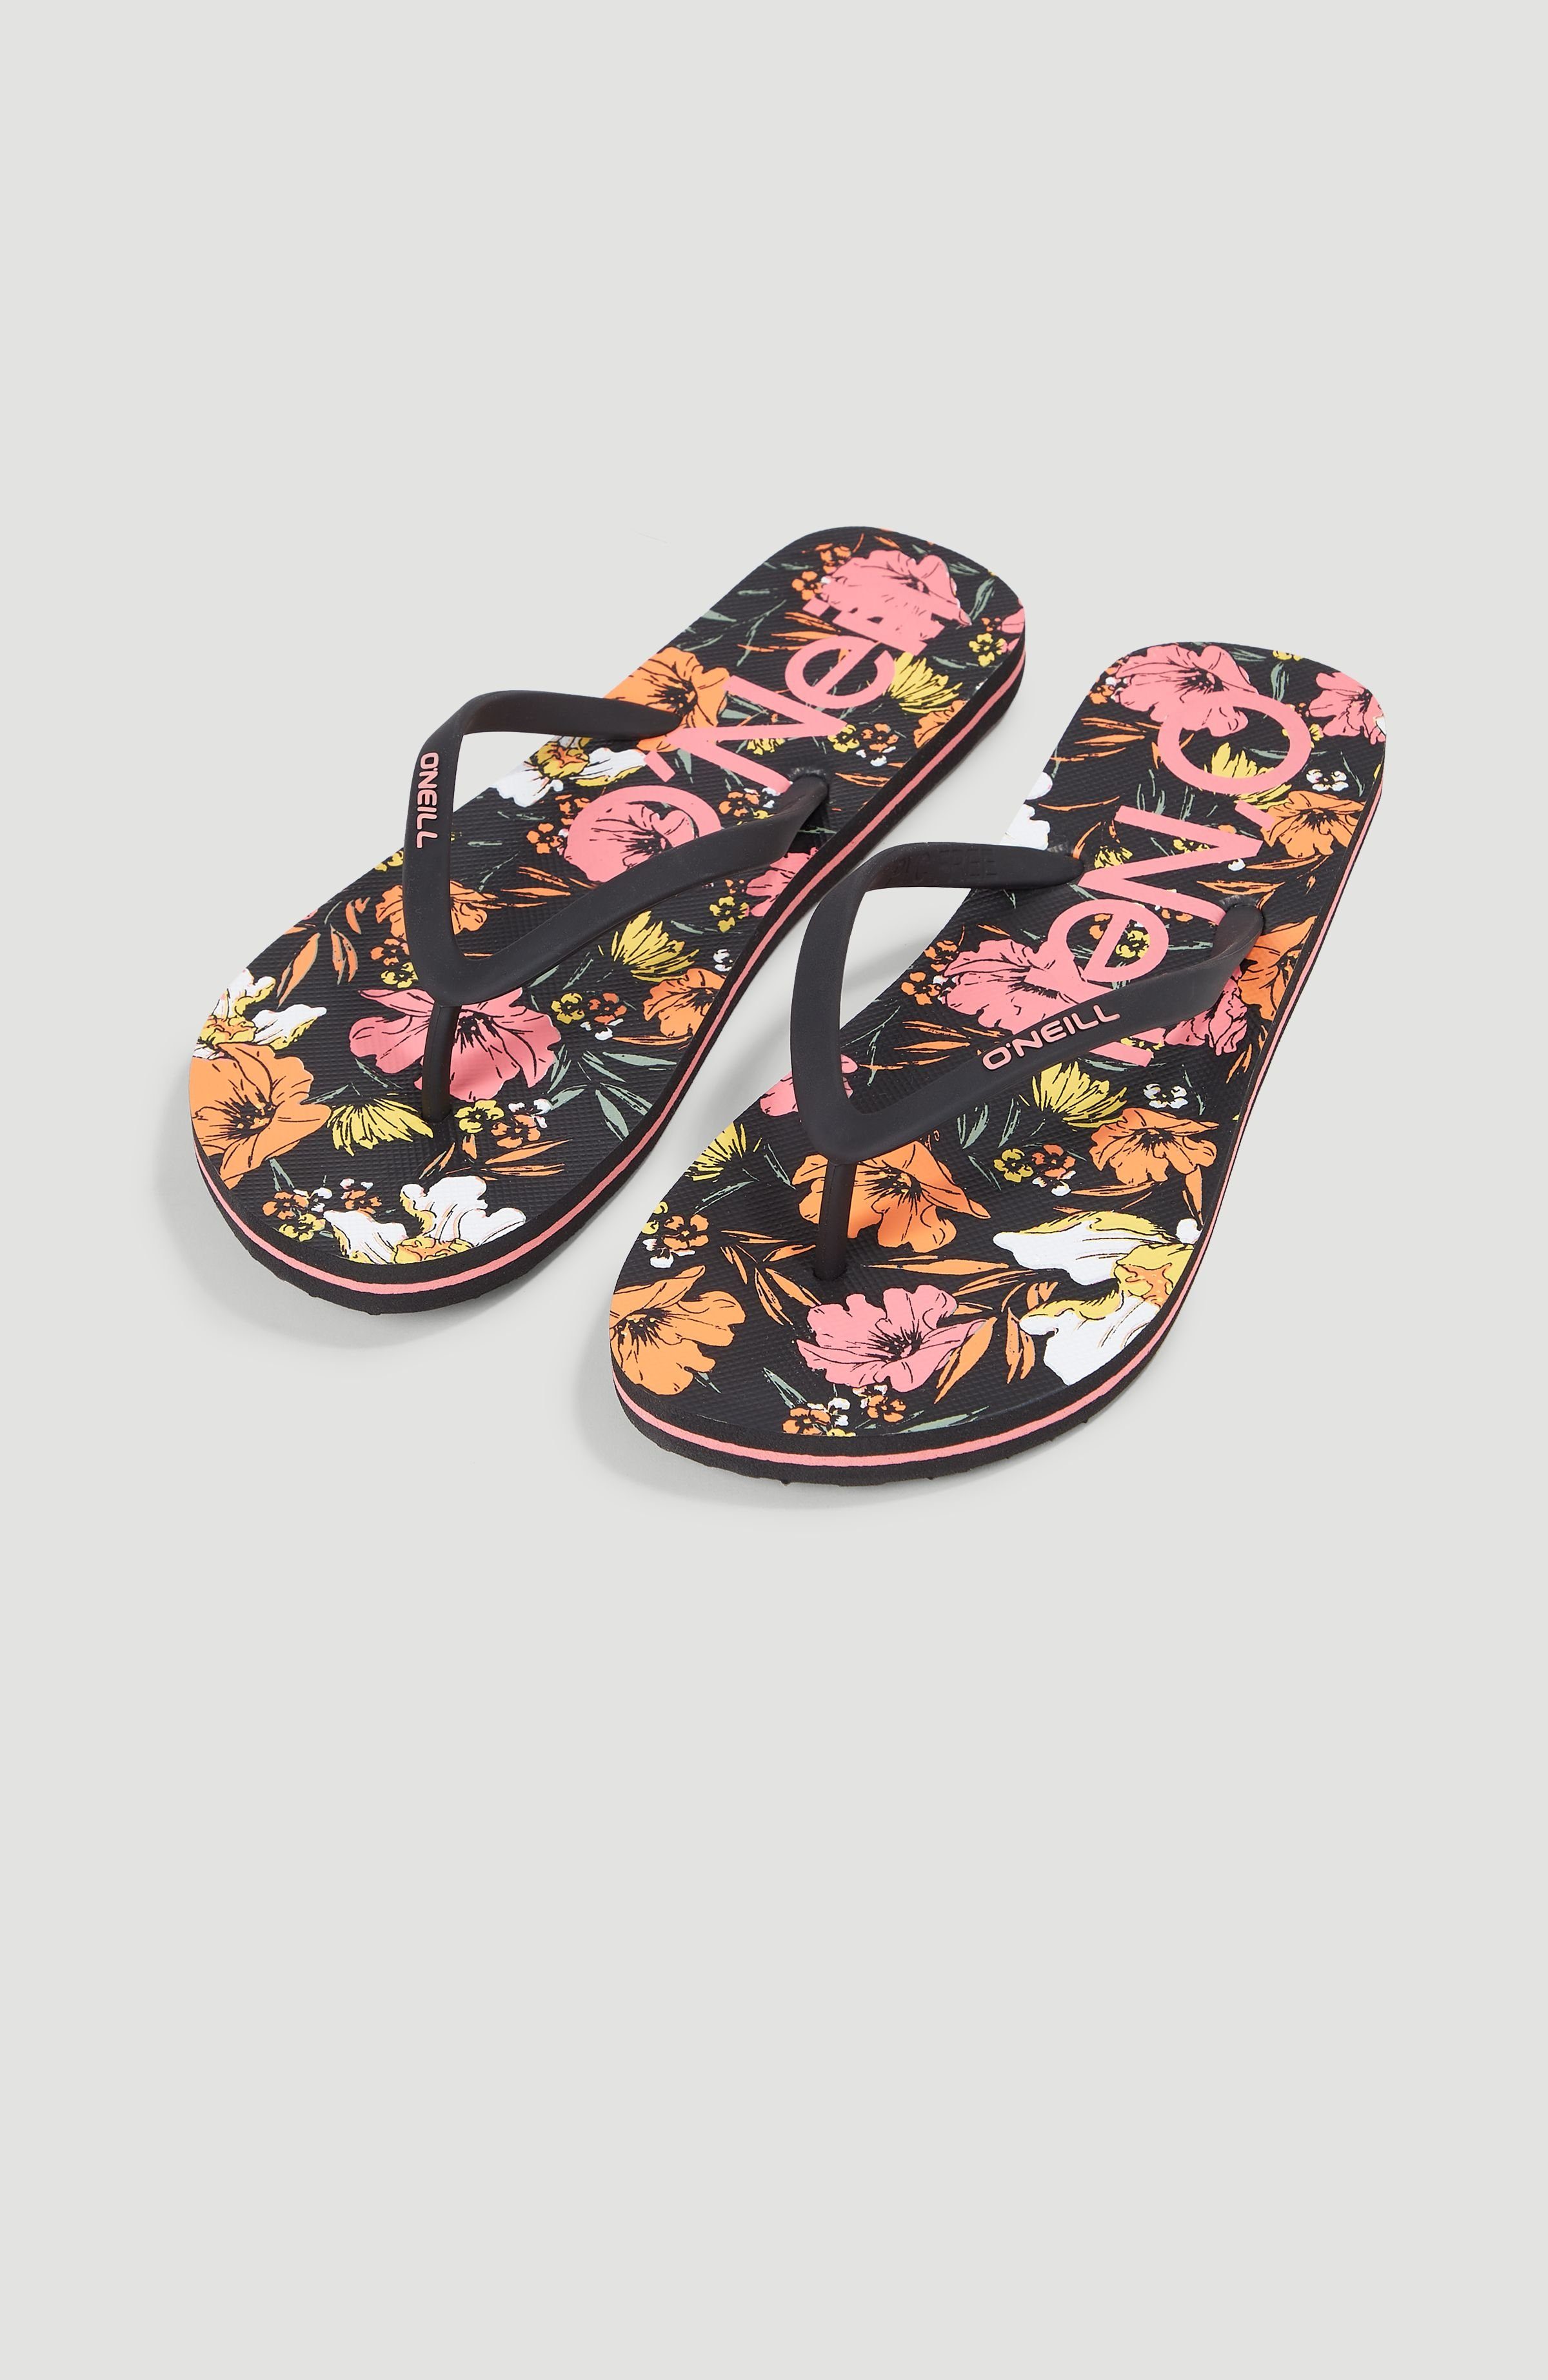 O'Neill PROFILE GRAPHIC SANDALS Zehentrenner